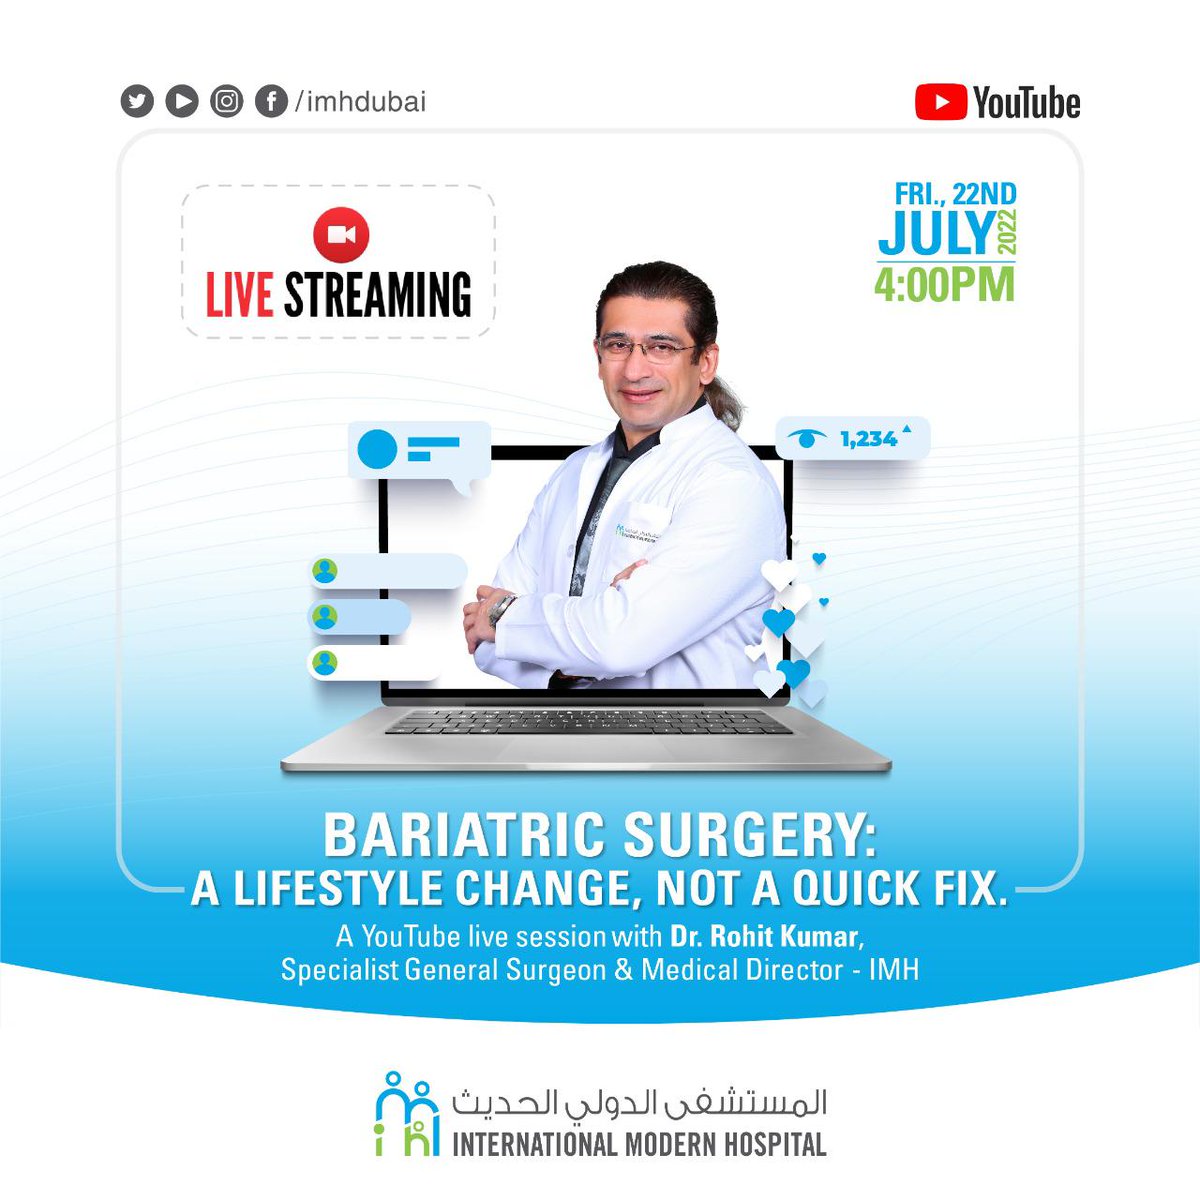 Join Dr. Rohit Kumar (Medical Director and general Surgeon) live on YouTube and Facebook as he discusses an interesting topic on BARIATRIC SURGERY: A LIFESTYLE CHANGE, NOT A QUICK FIX! Date: Friday, 22nd July 2022 Time: 4:00 PM (Prompt)